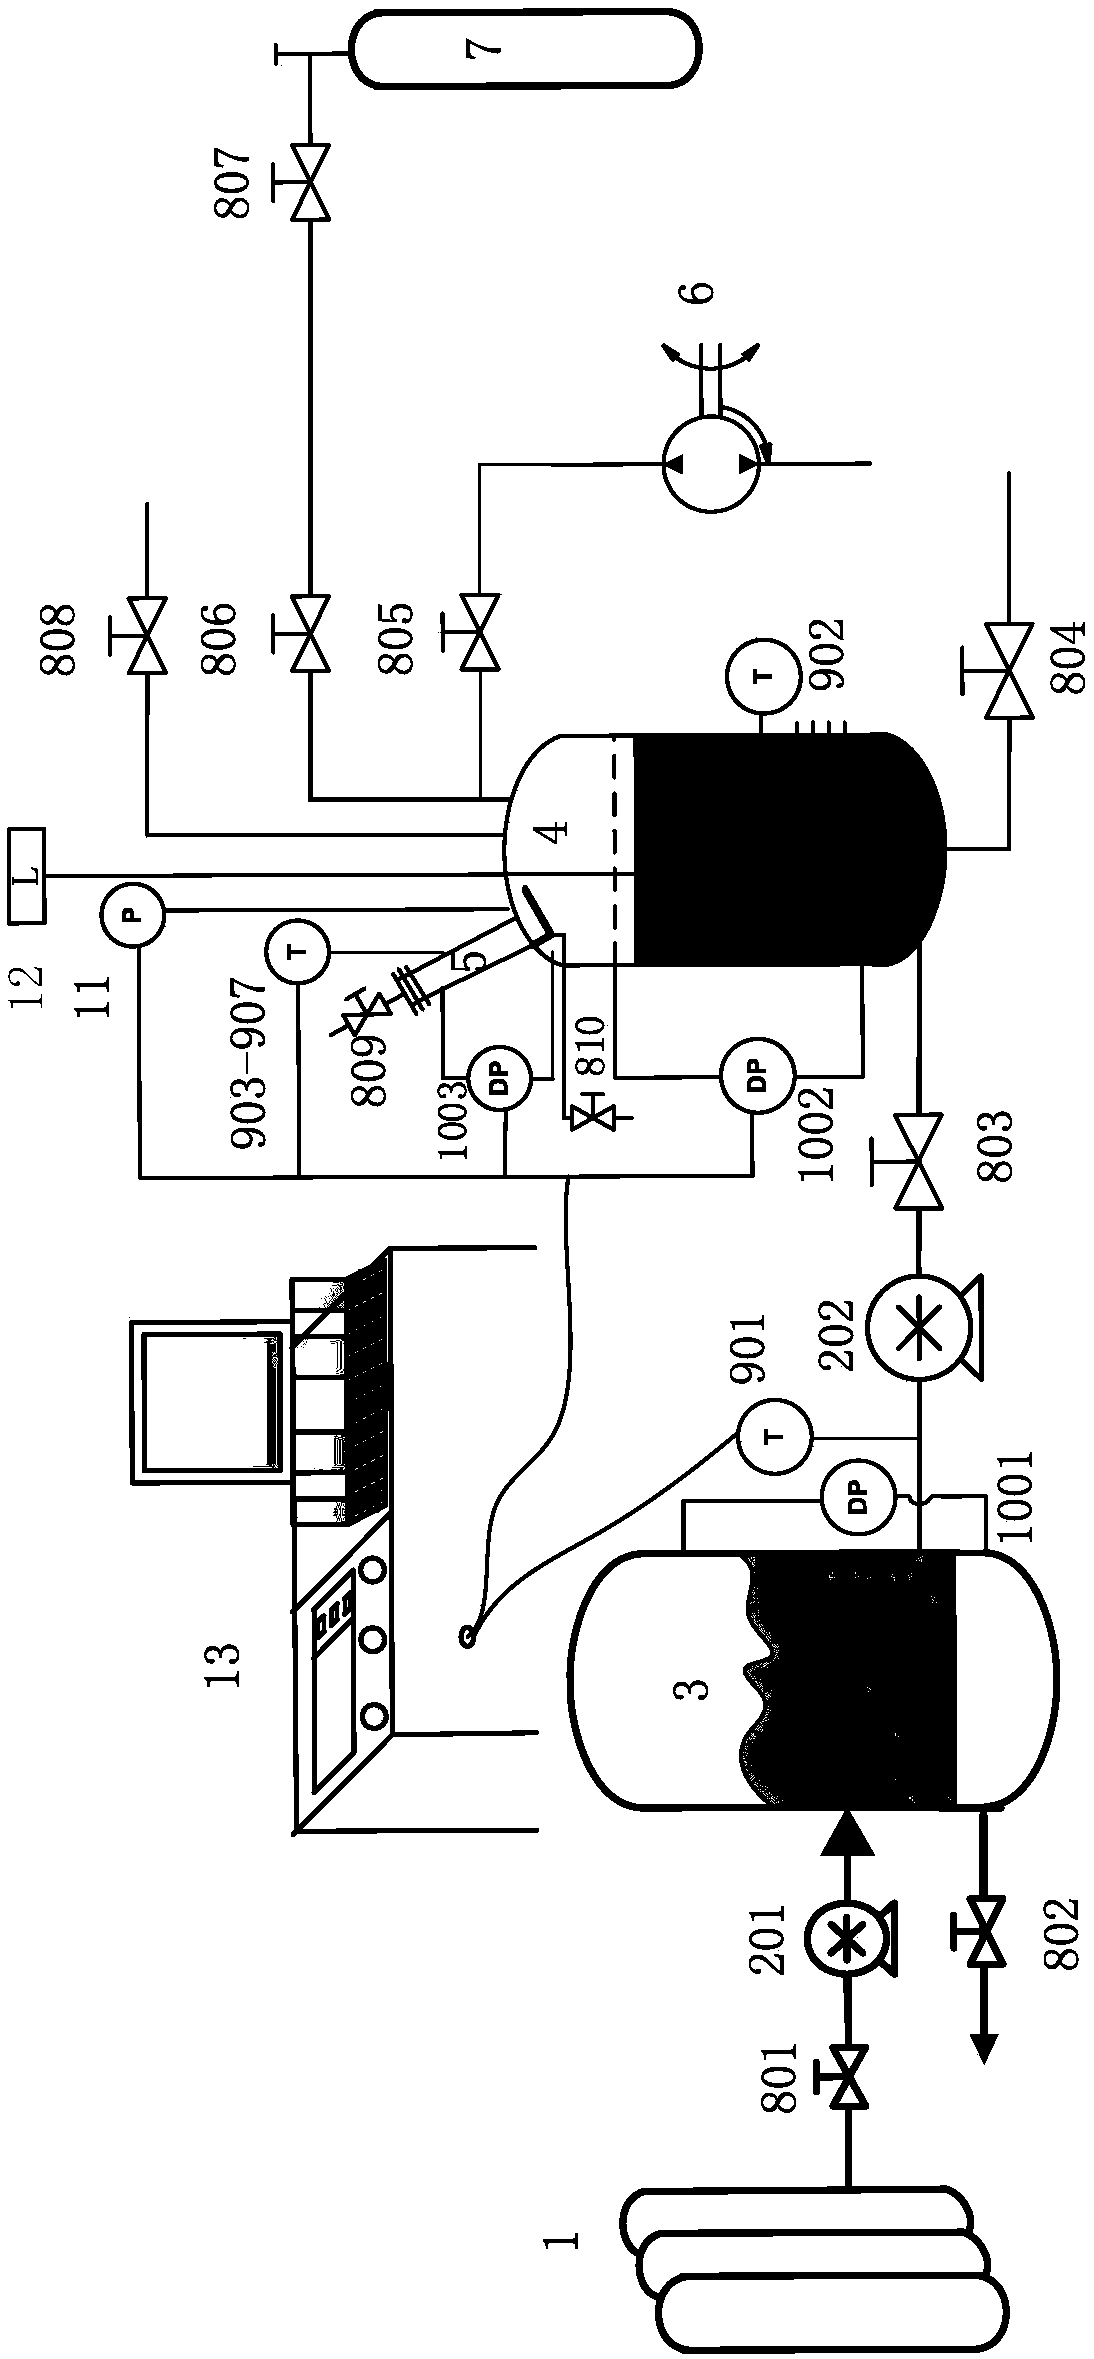 Nuclear reactor pressure regulator safety valve water seal test system and method